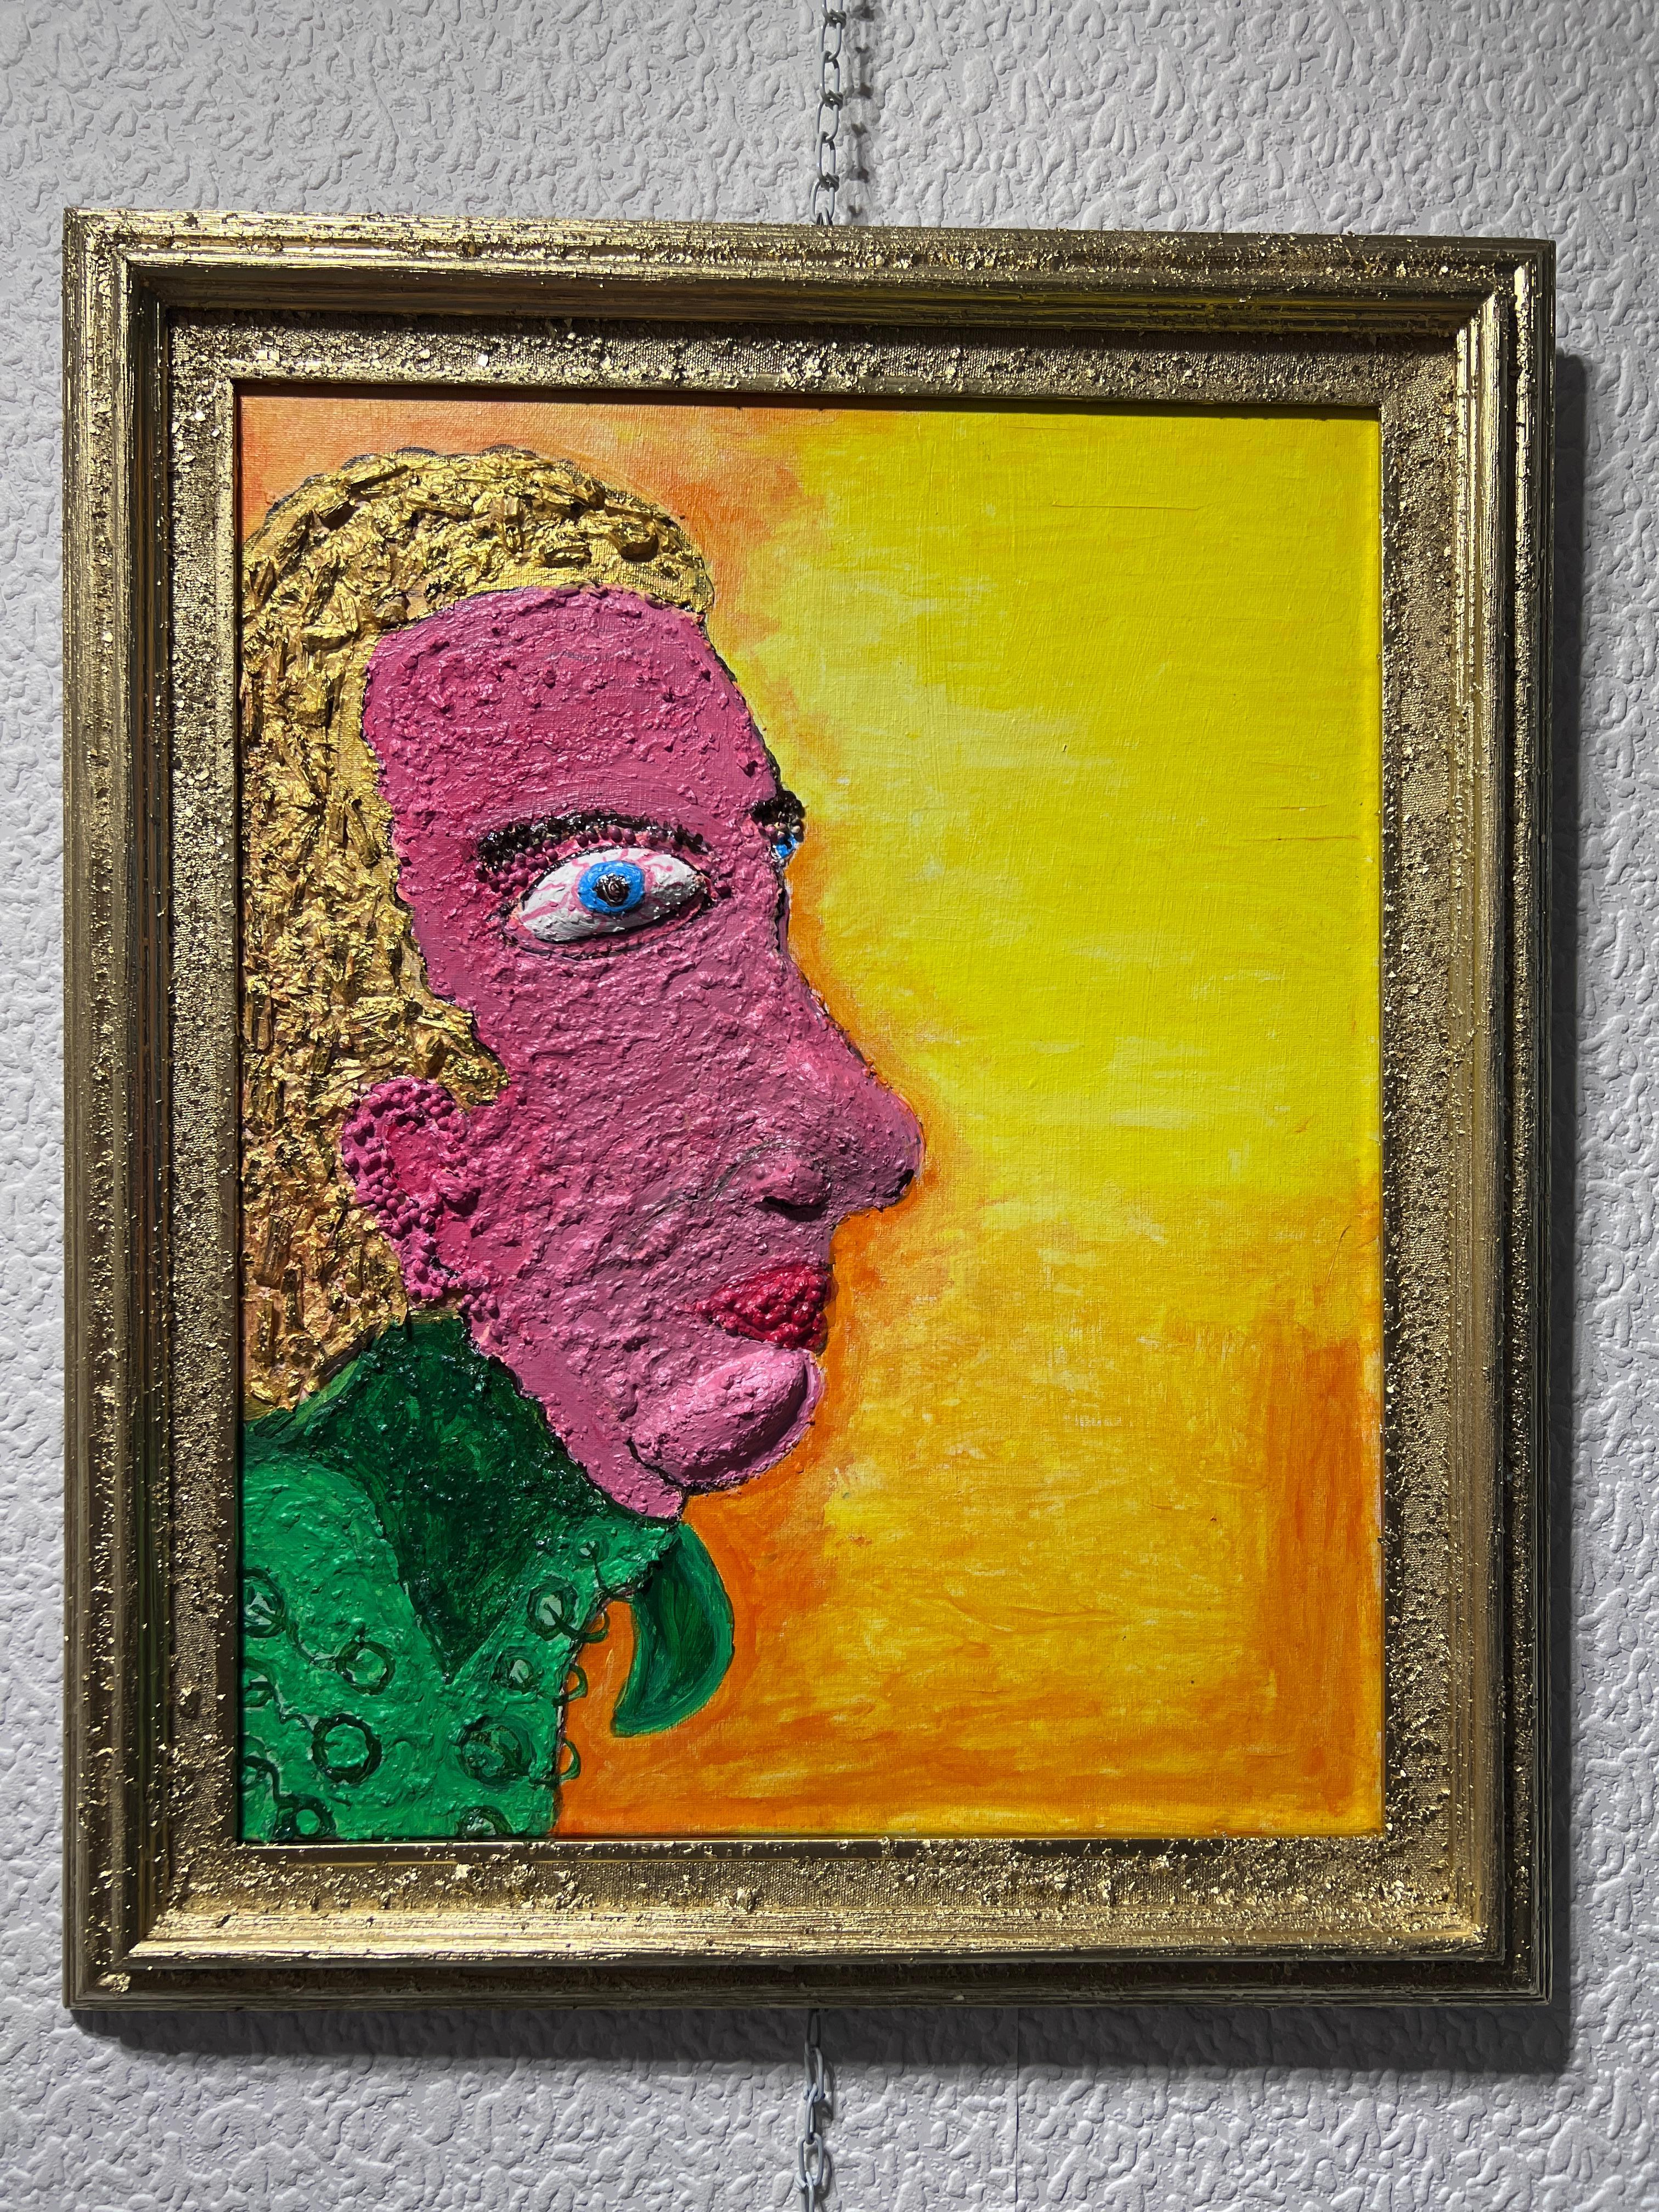 This is a rare unique original acrylic/oil/mixed media painting on canvas in a naive primitivism style depicting Andrew Jackson. Andrew Jackson (March 15, 1767 – June 8, 1845) was an American lawyer, planter, general, and statesman who served as the